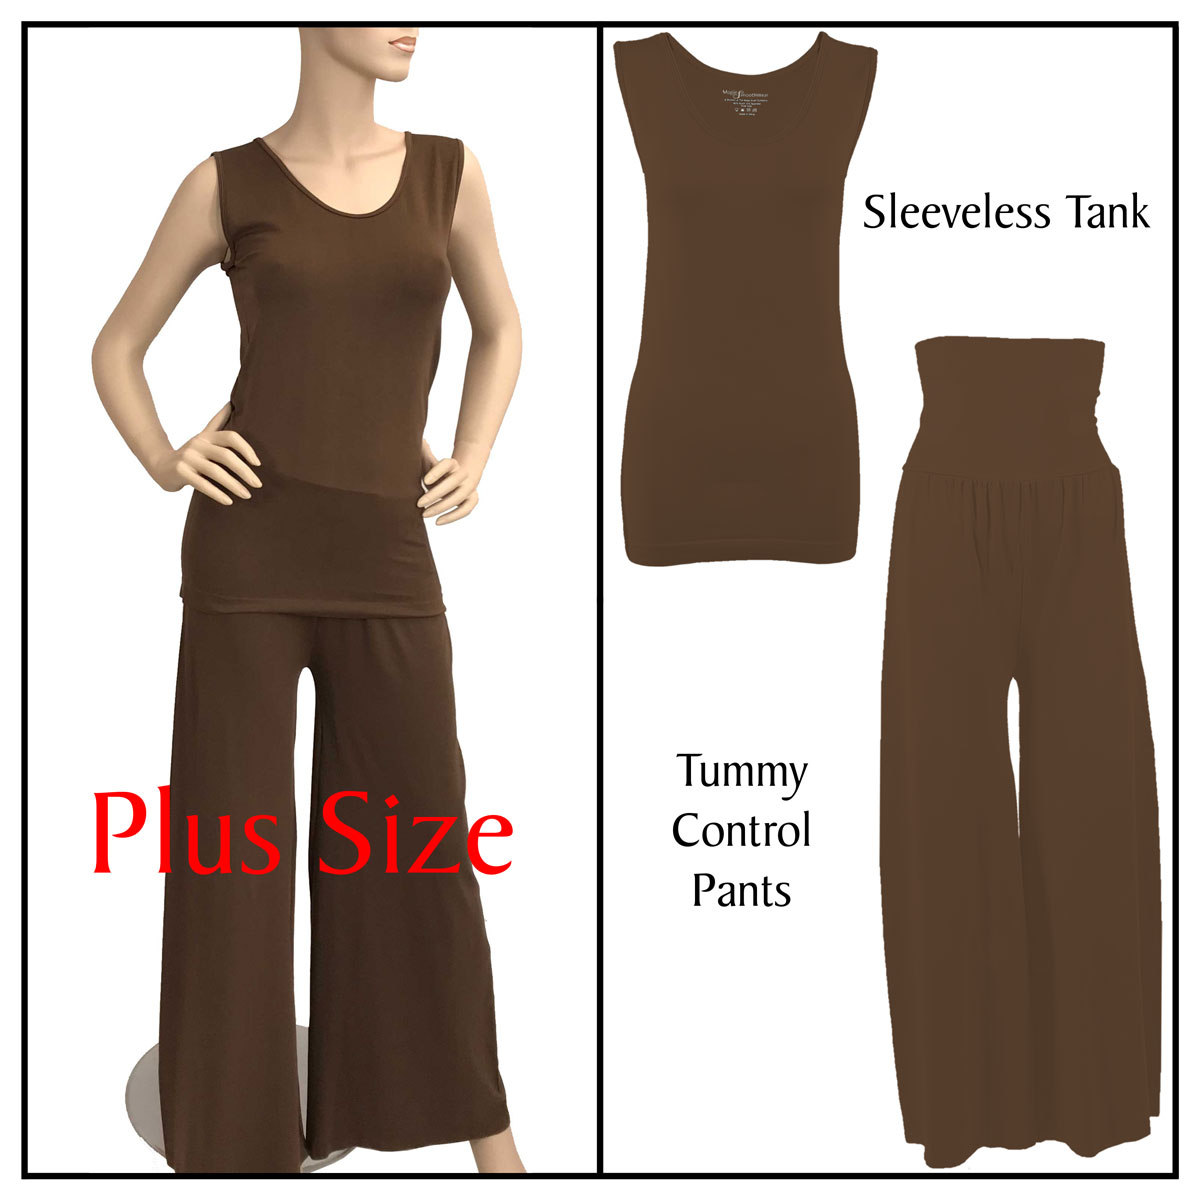 Chestnut Sleeveless Top (Plus Size) with Pants